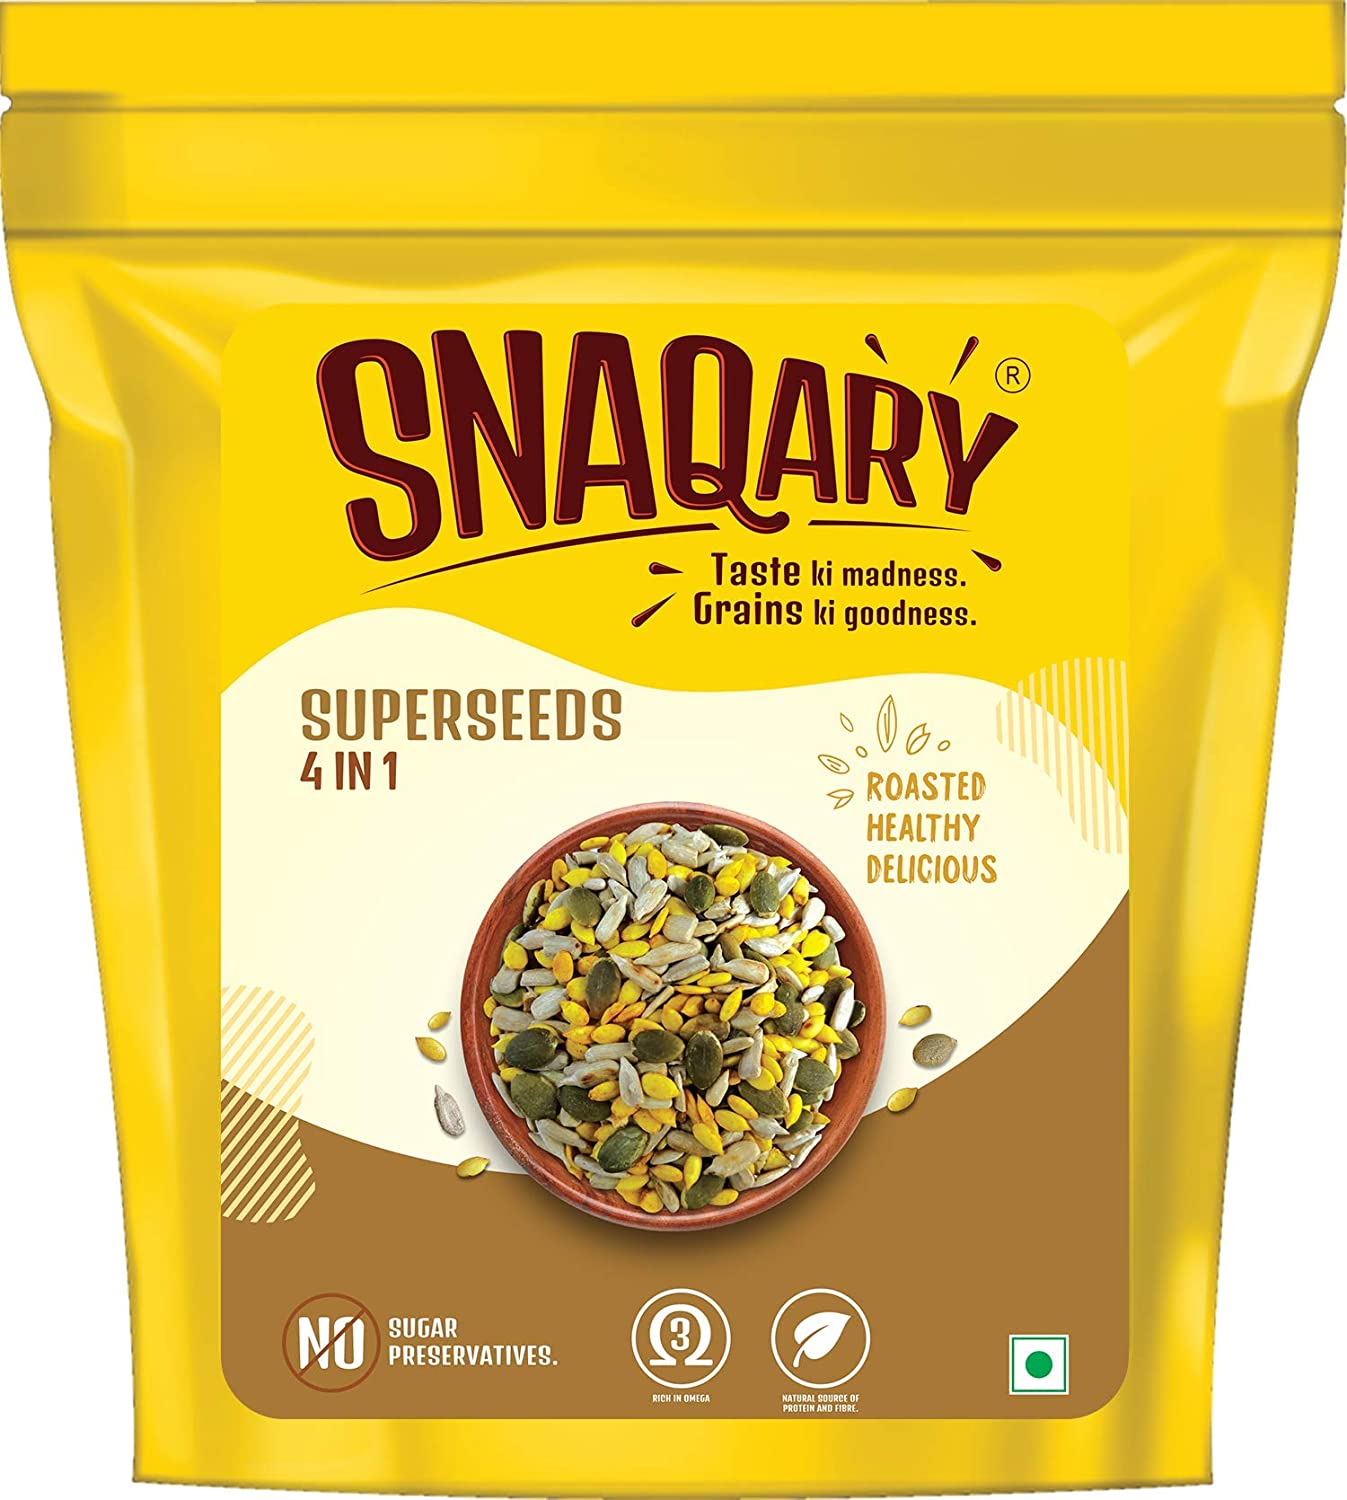 Snaqary Roasted Healthy Super Seeds 4 in 1 Image